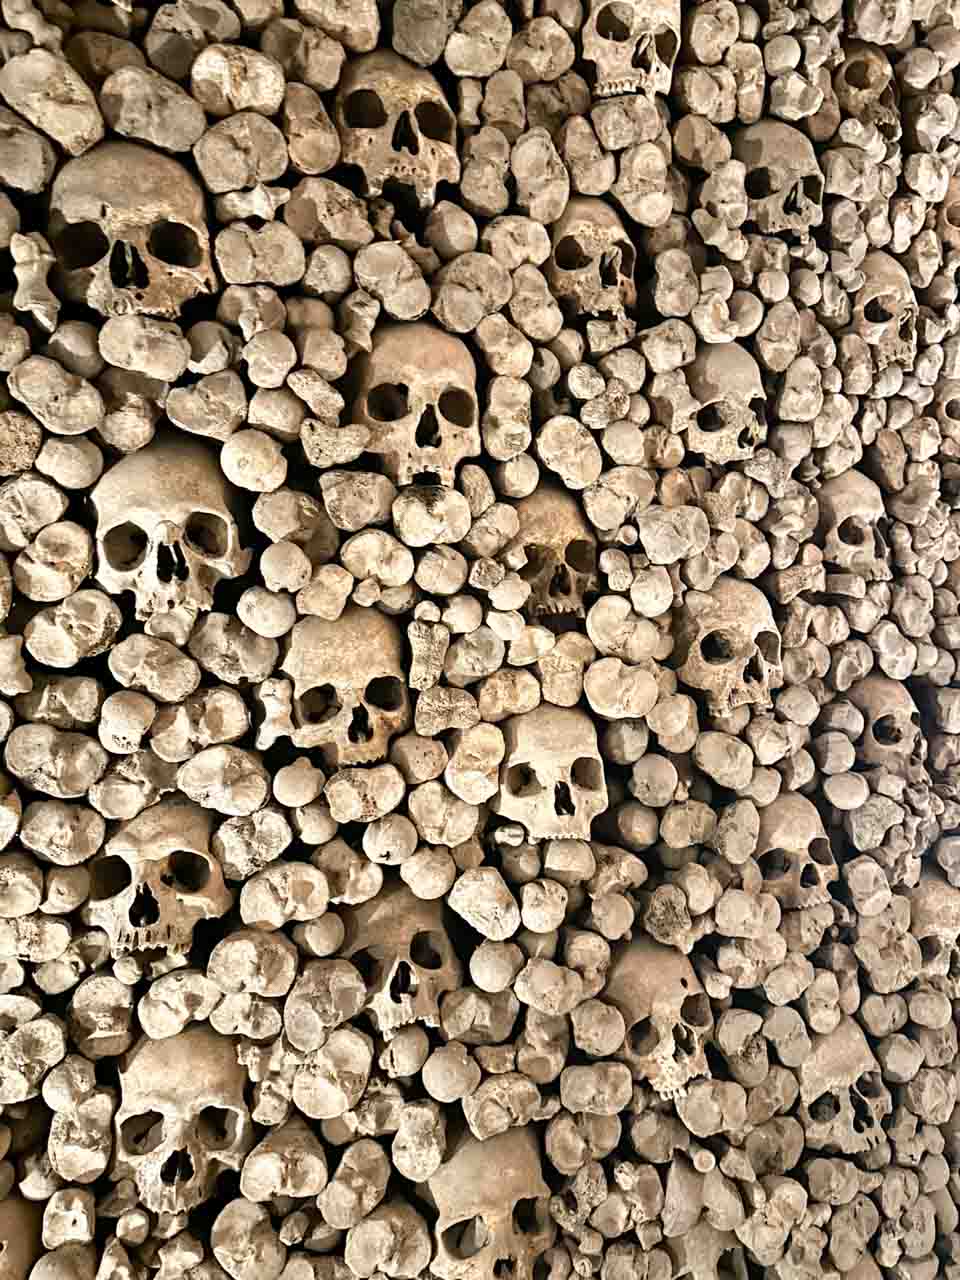 Close-up of the skulls and bones on display at the Brno Ossuary